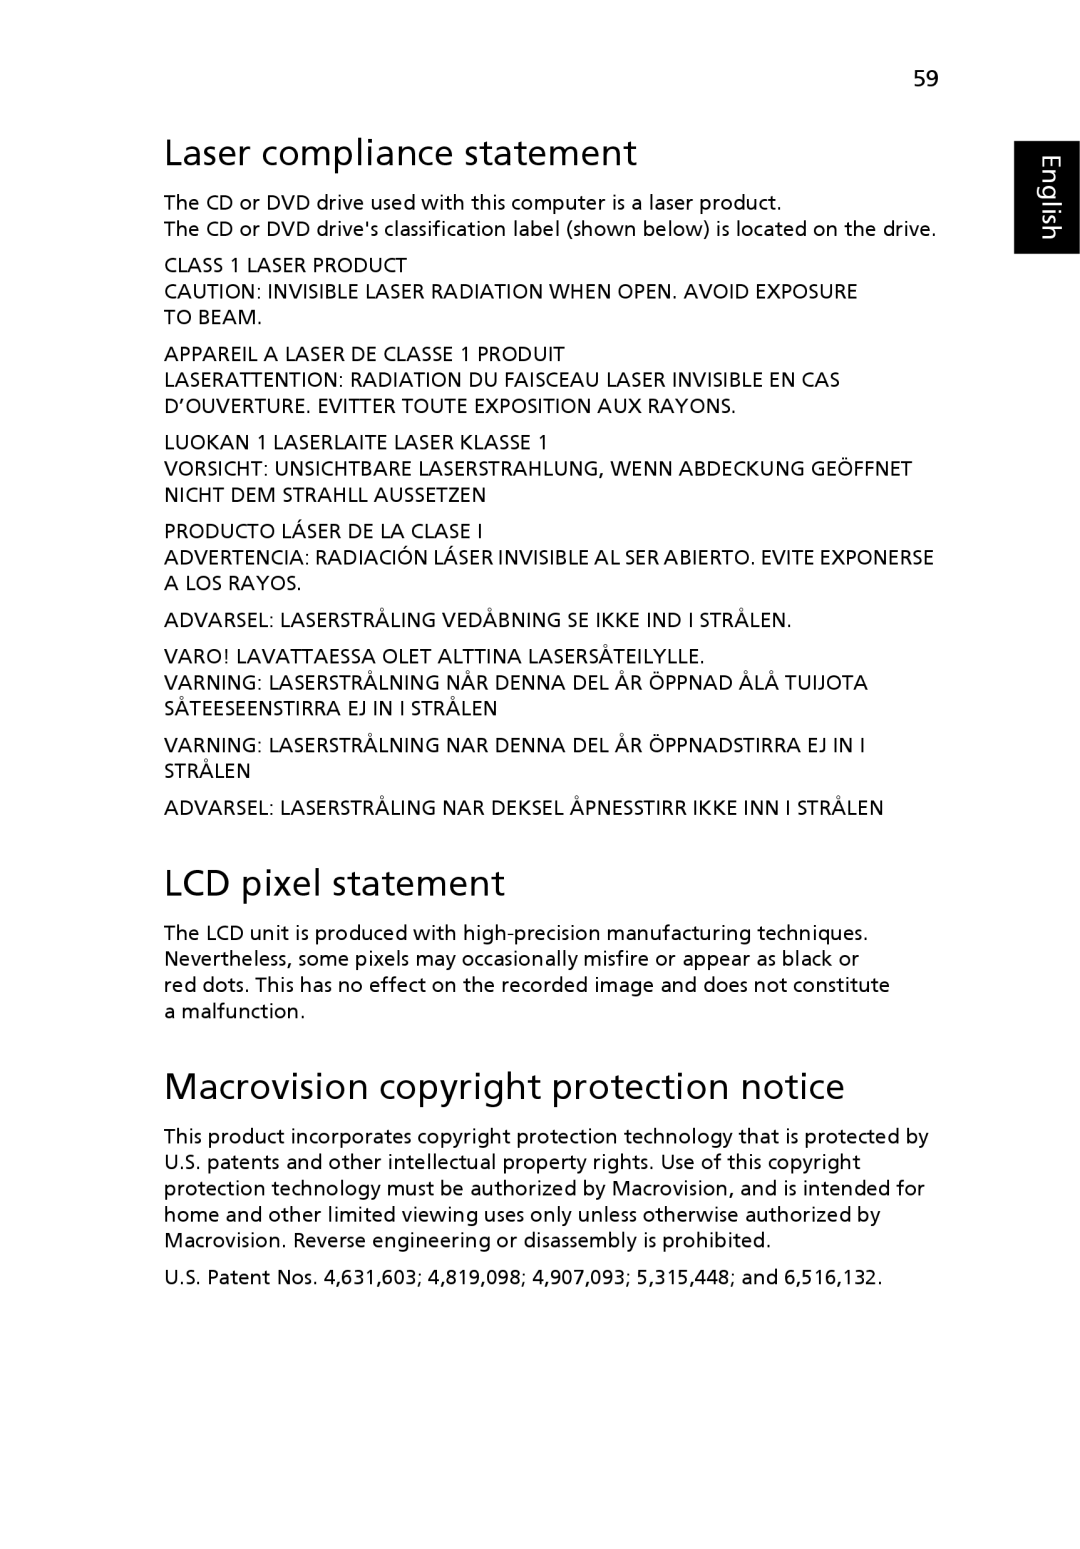 Acer 4080, 4070 manual Laser compliance statement, LCD pixel statement, Macrovision copyright protection notice 